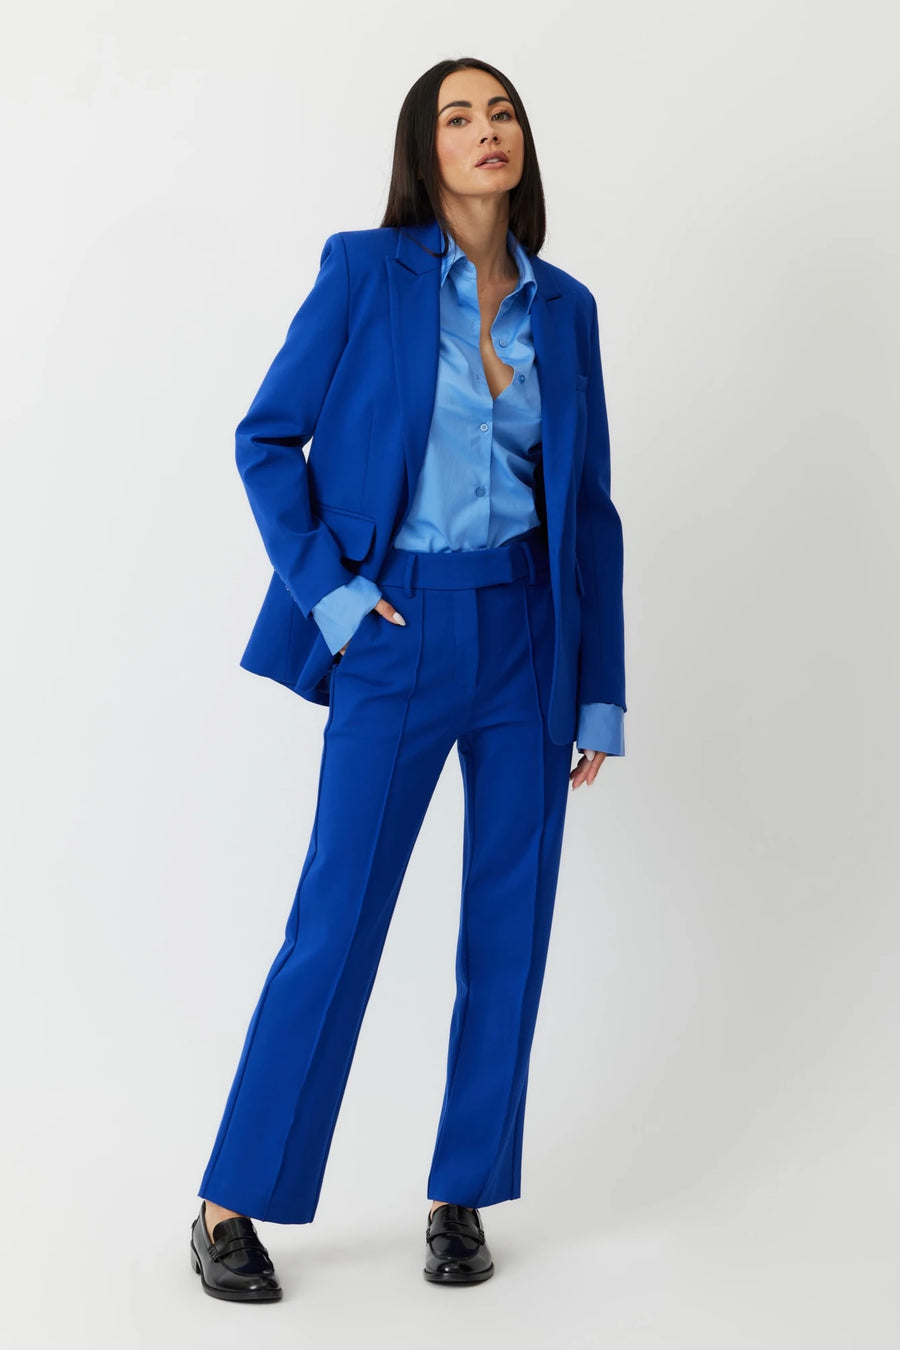 The Prescott single breasted ponte blazer in lapis blue by Greyven